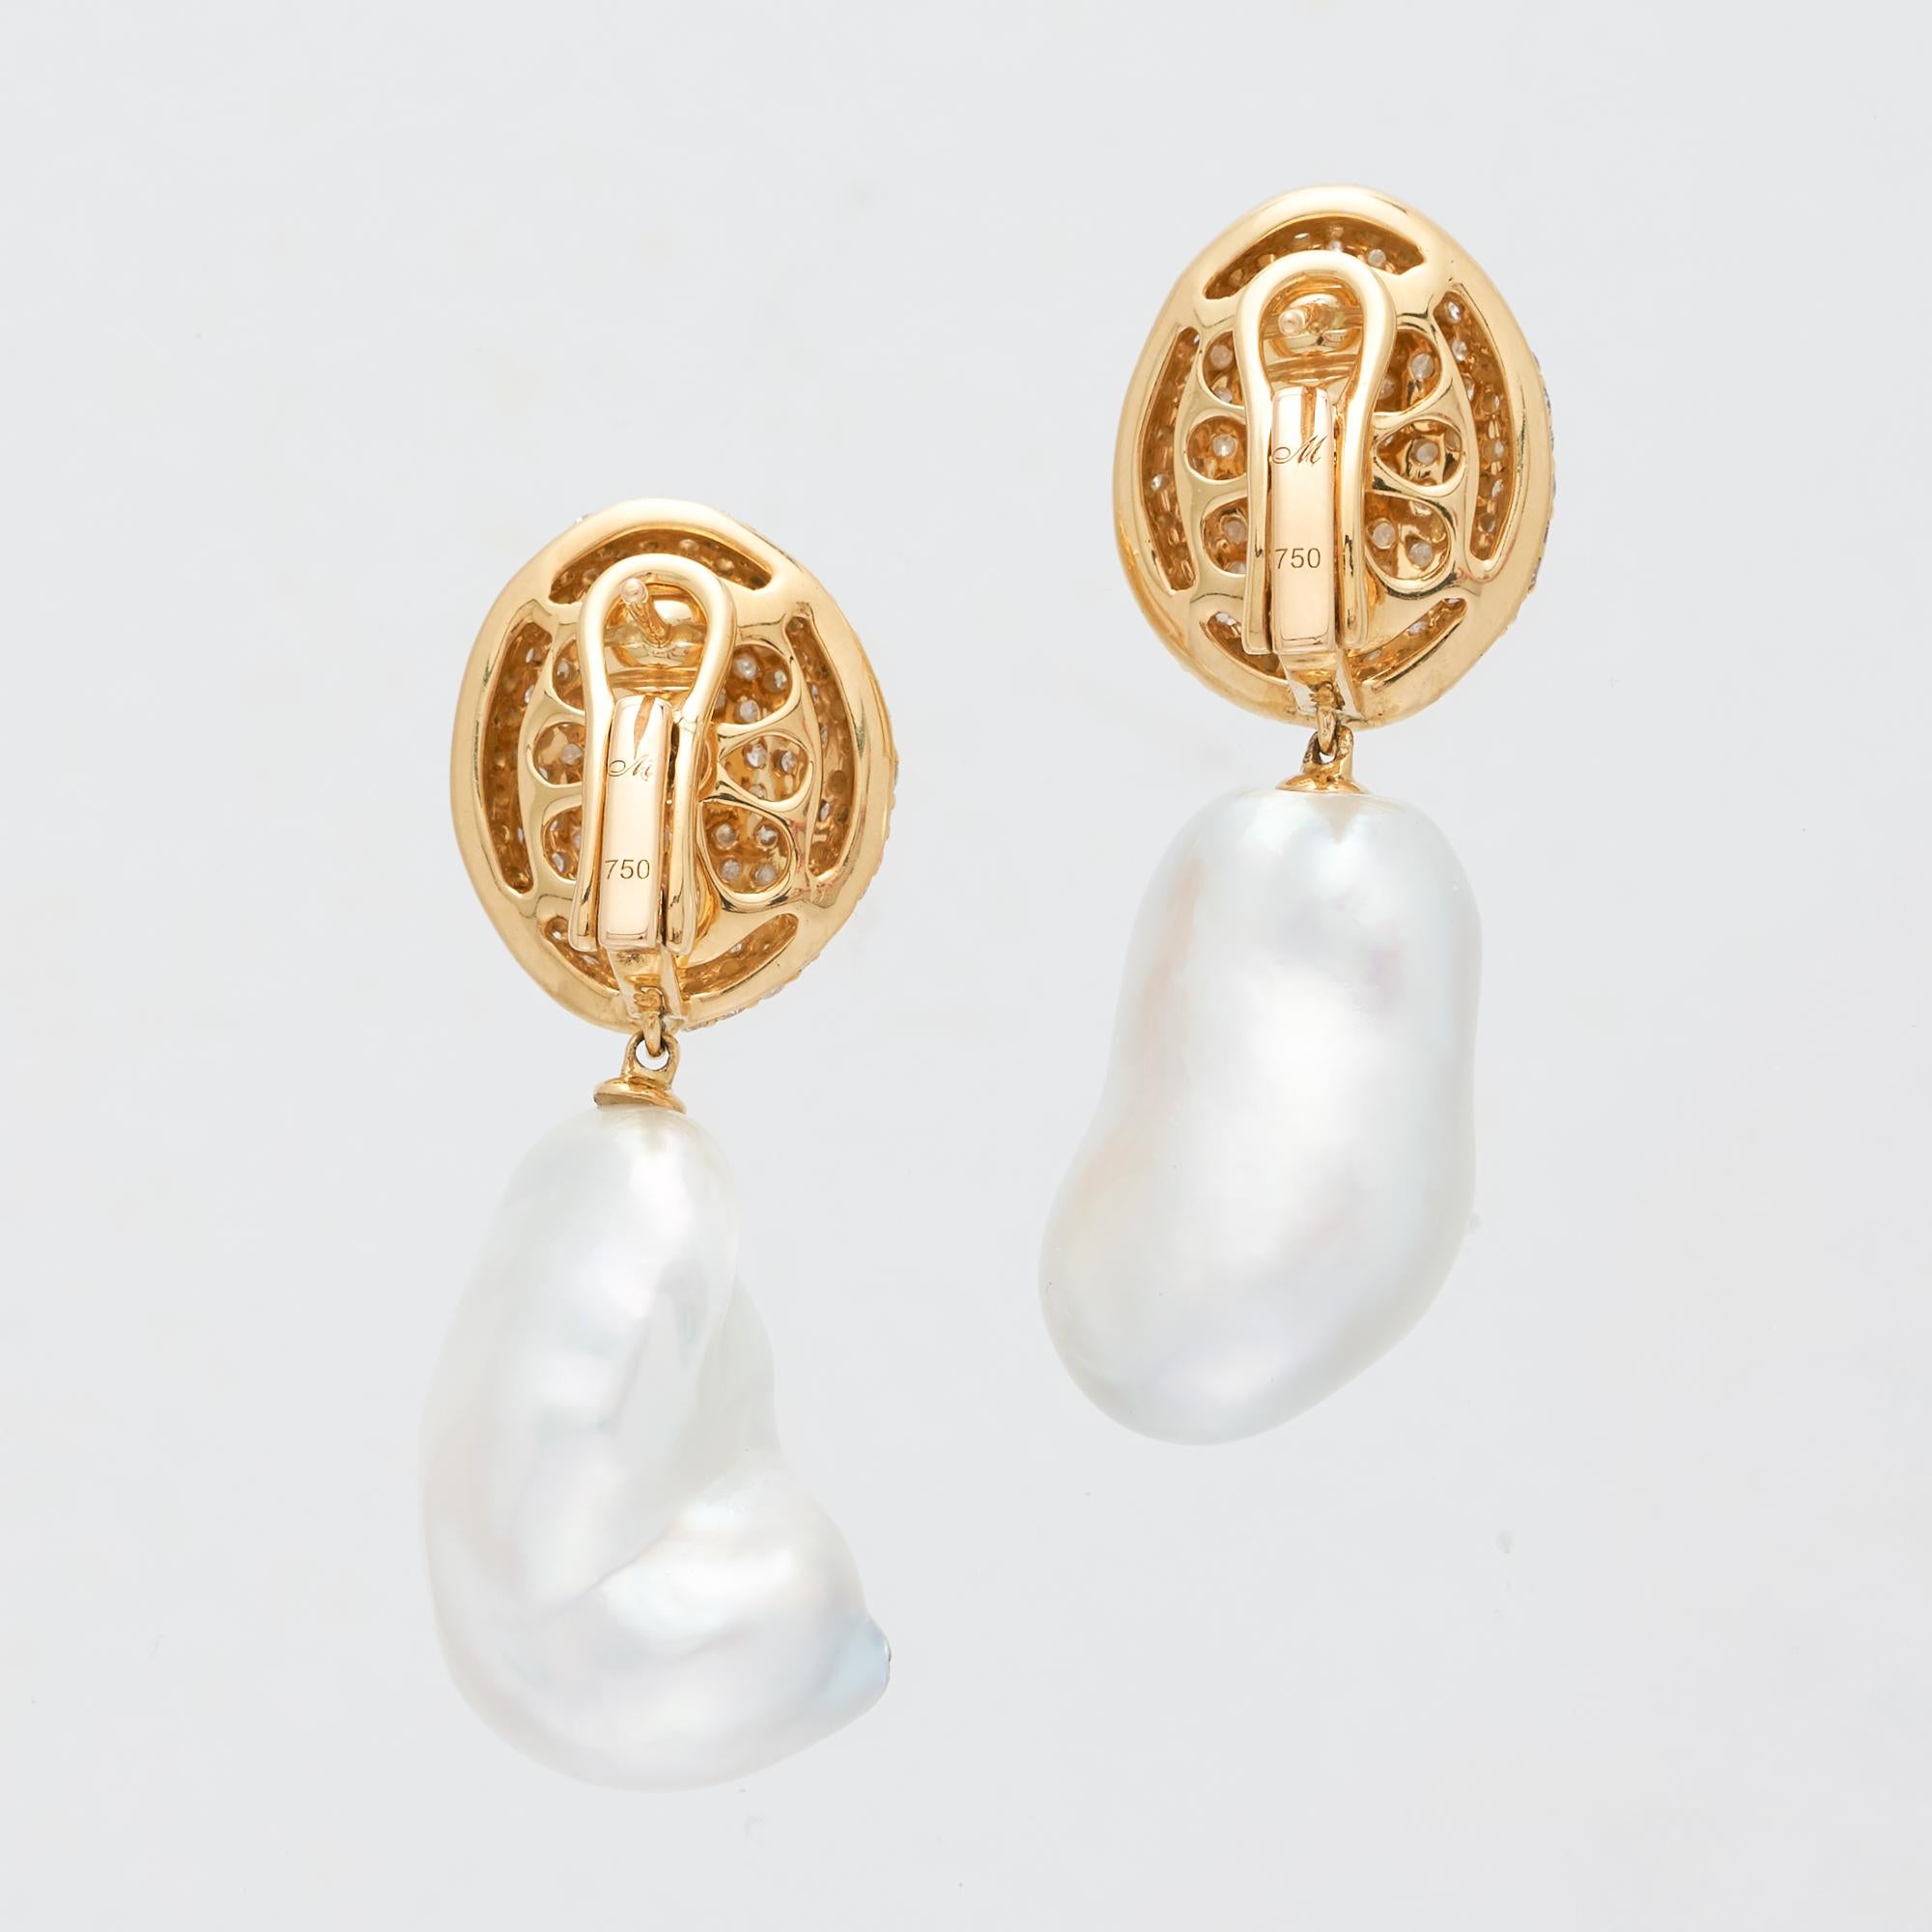 Margot McKinney 18 karat Yellow Gold South Sea Pearl & White Diamond Drop Earrings featuring a pair of baroque South Sea pearls 14-16mm and an average 2.7 carat of diamonds.
